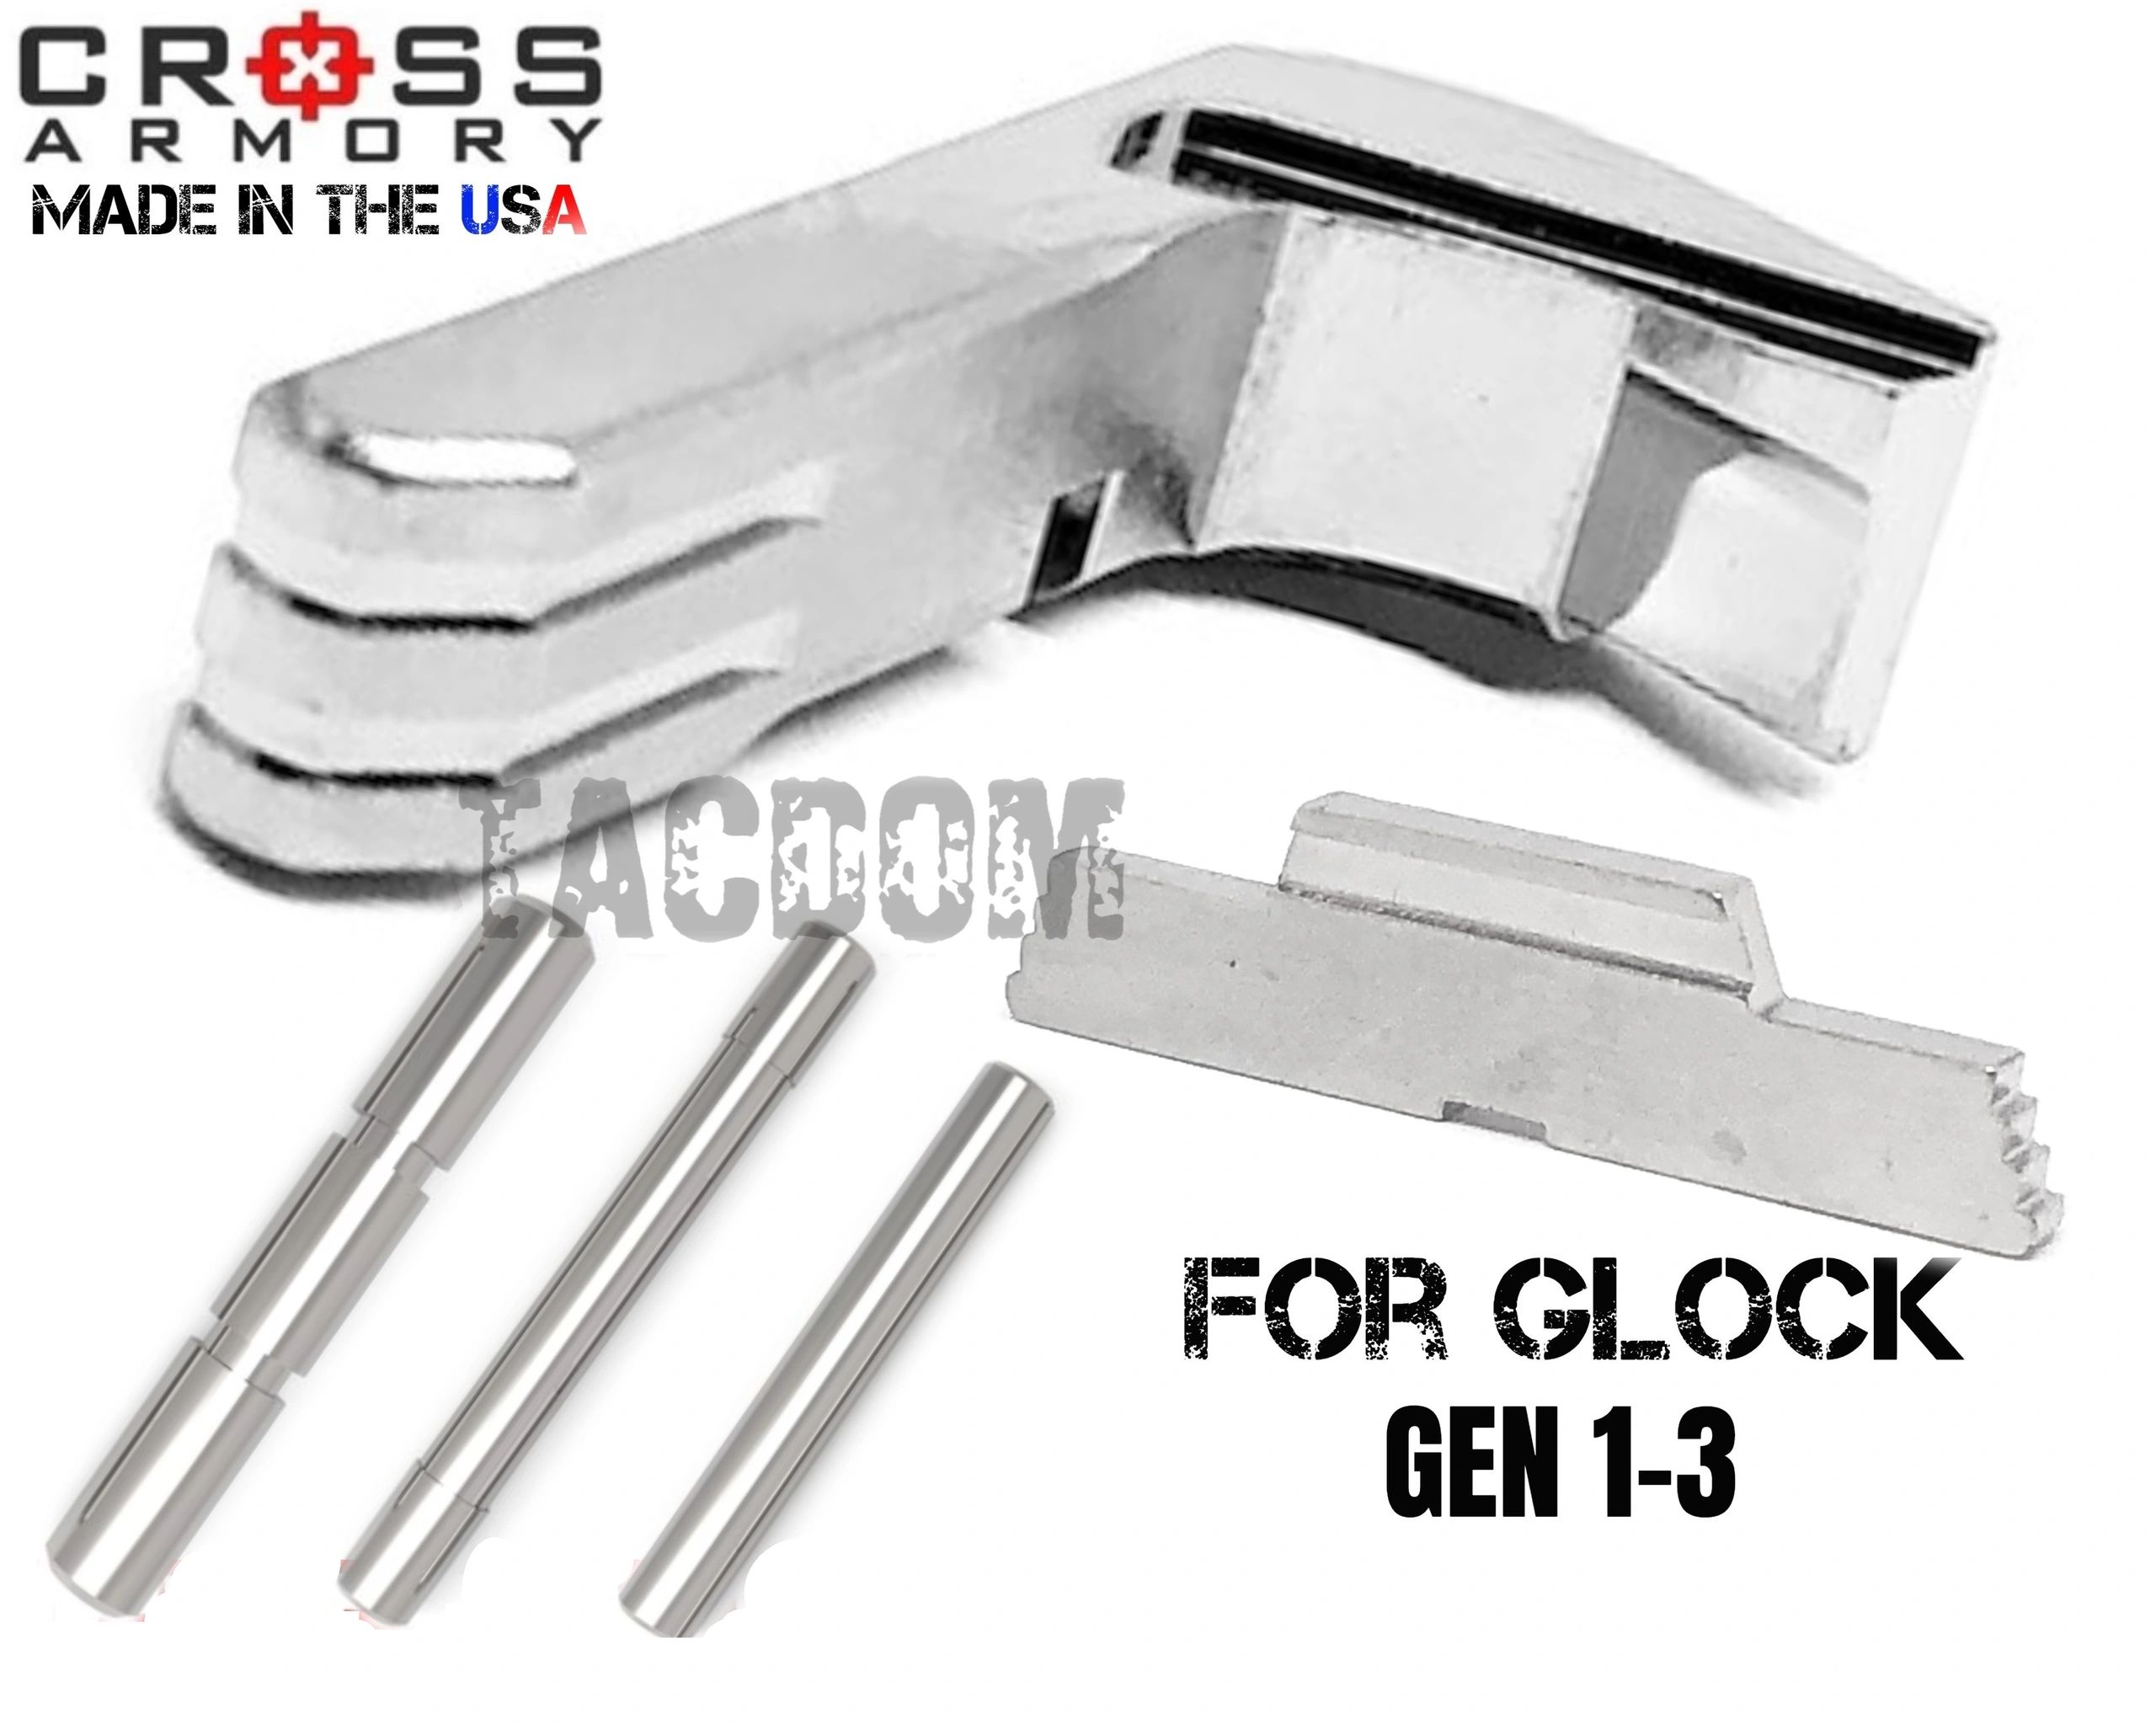 Cross Armory Silver Upgrade Parts for P80 Glock Extended Magazine Catch Slide 1 